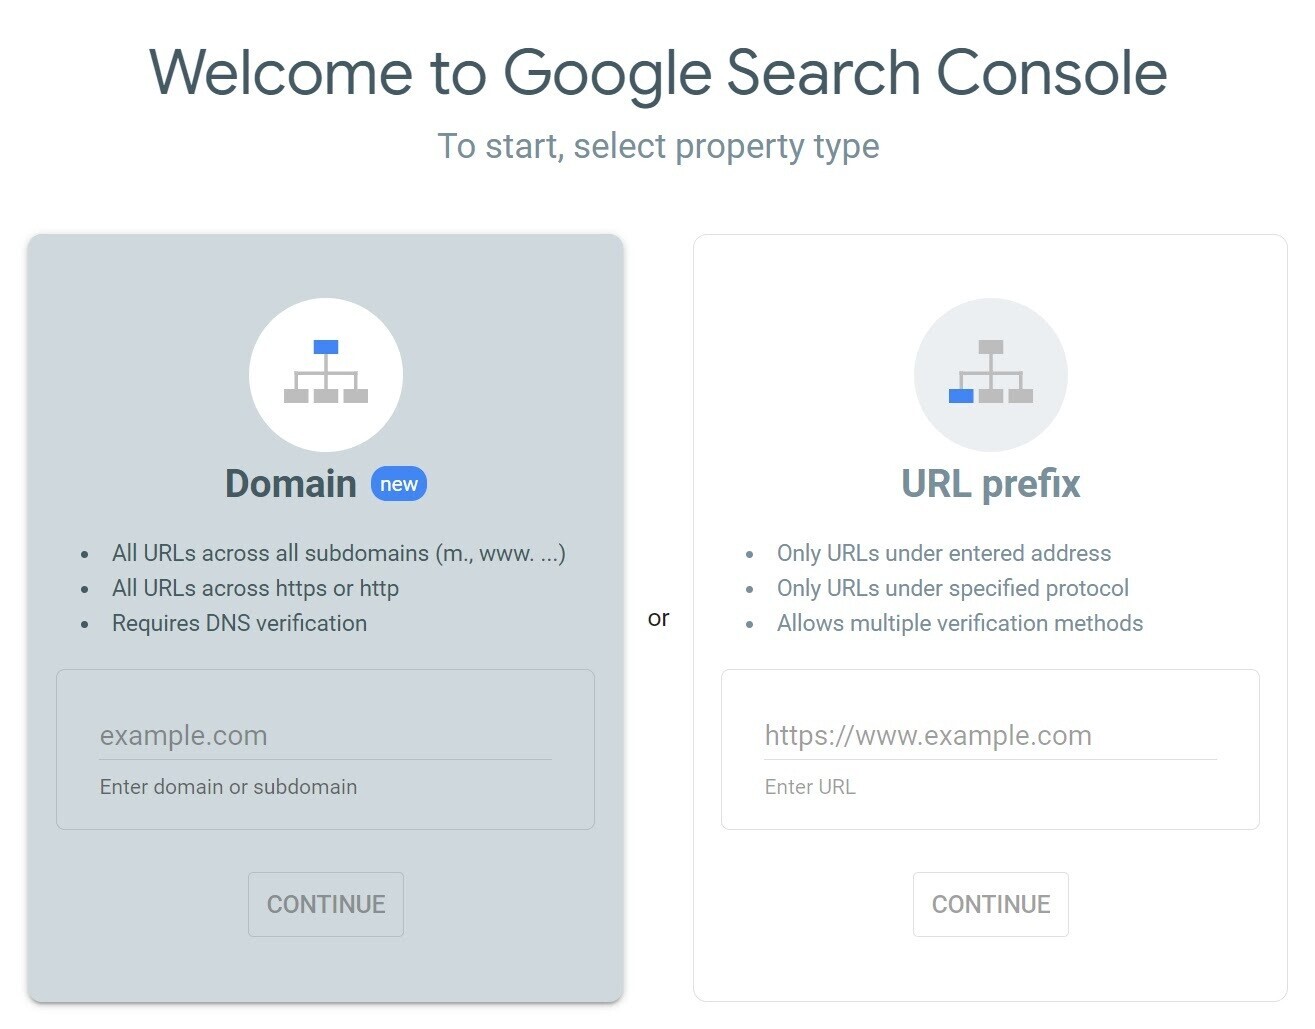 Welcome to Google Search Console page